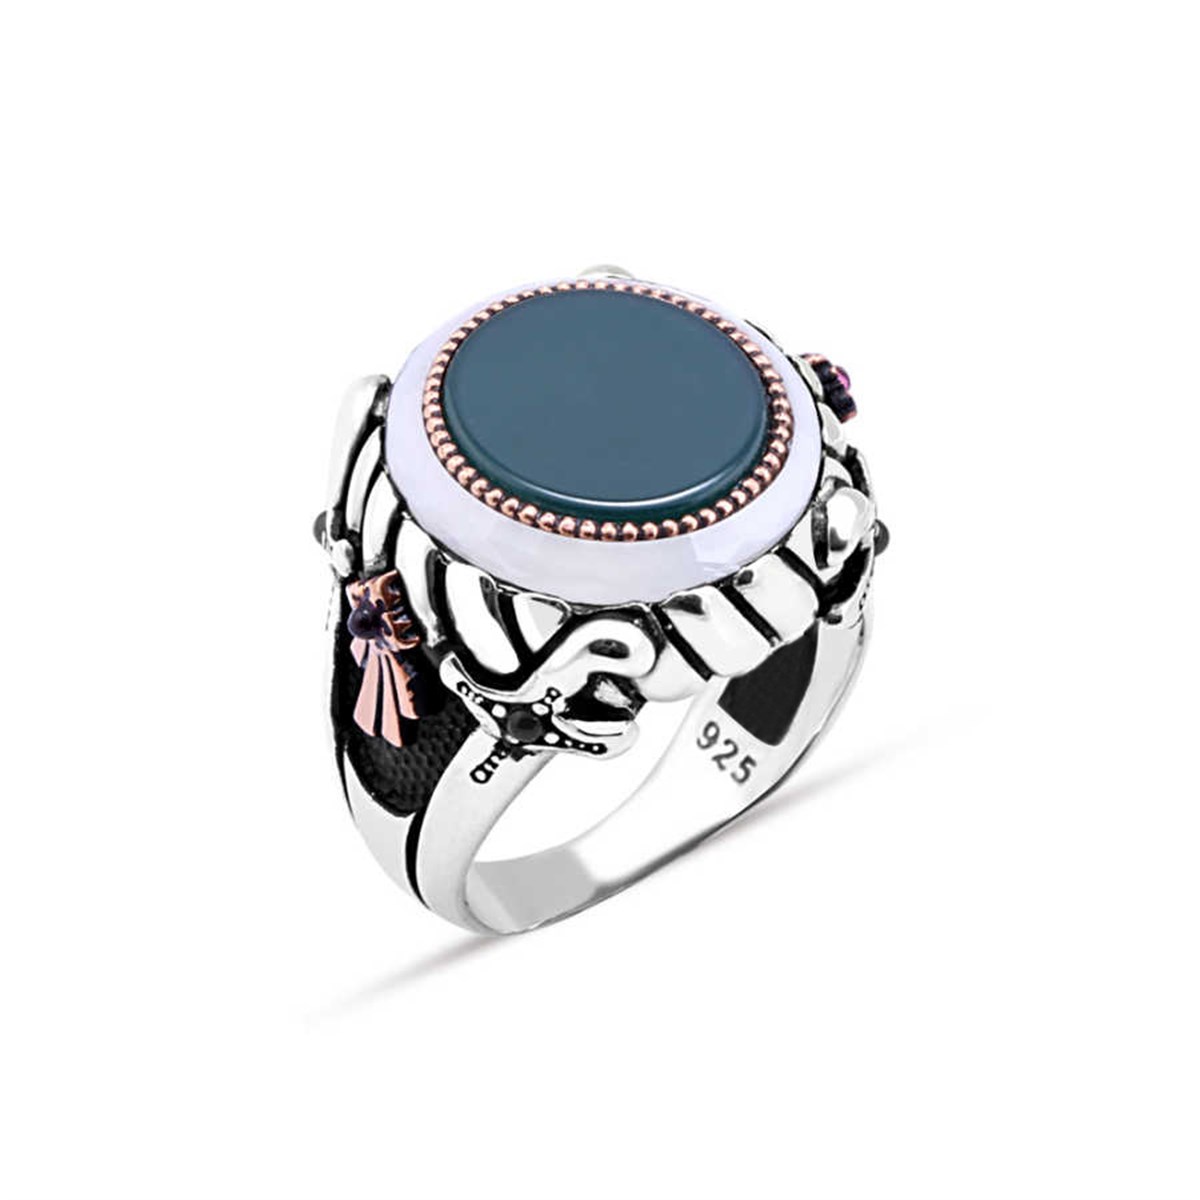 Sterling Silver Men's Ring with Green Agate Stone in the Middle and Circle Stone